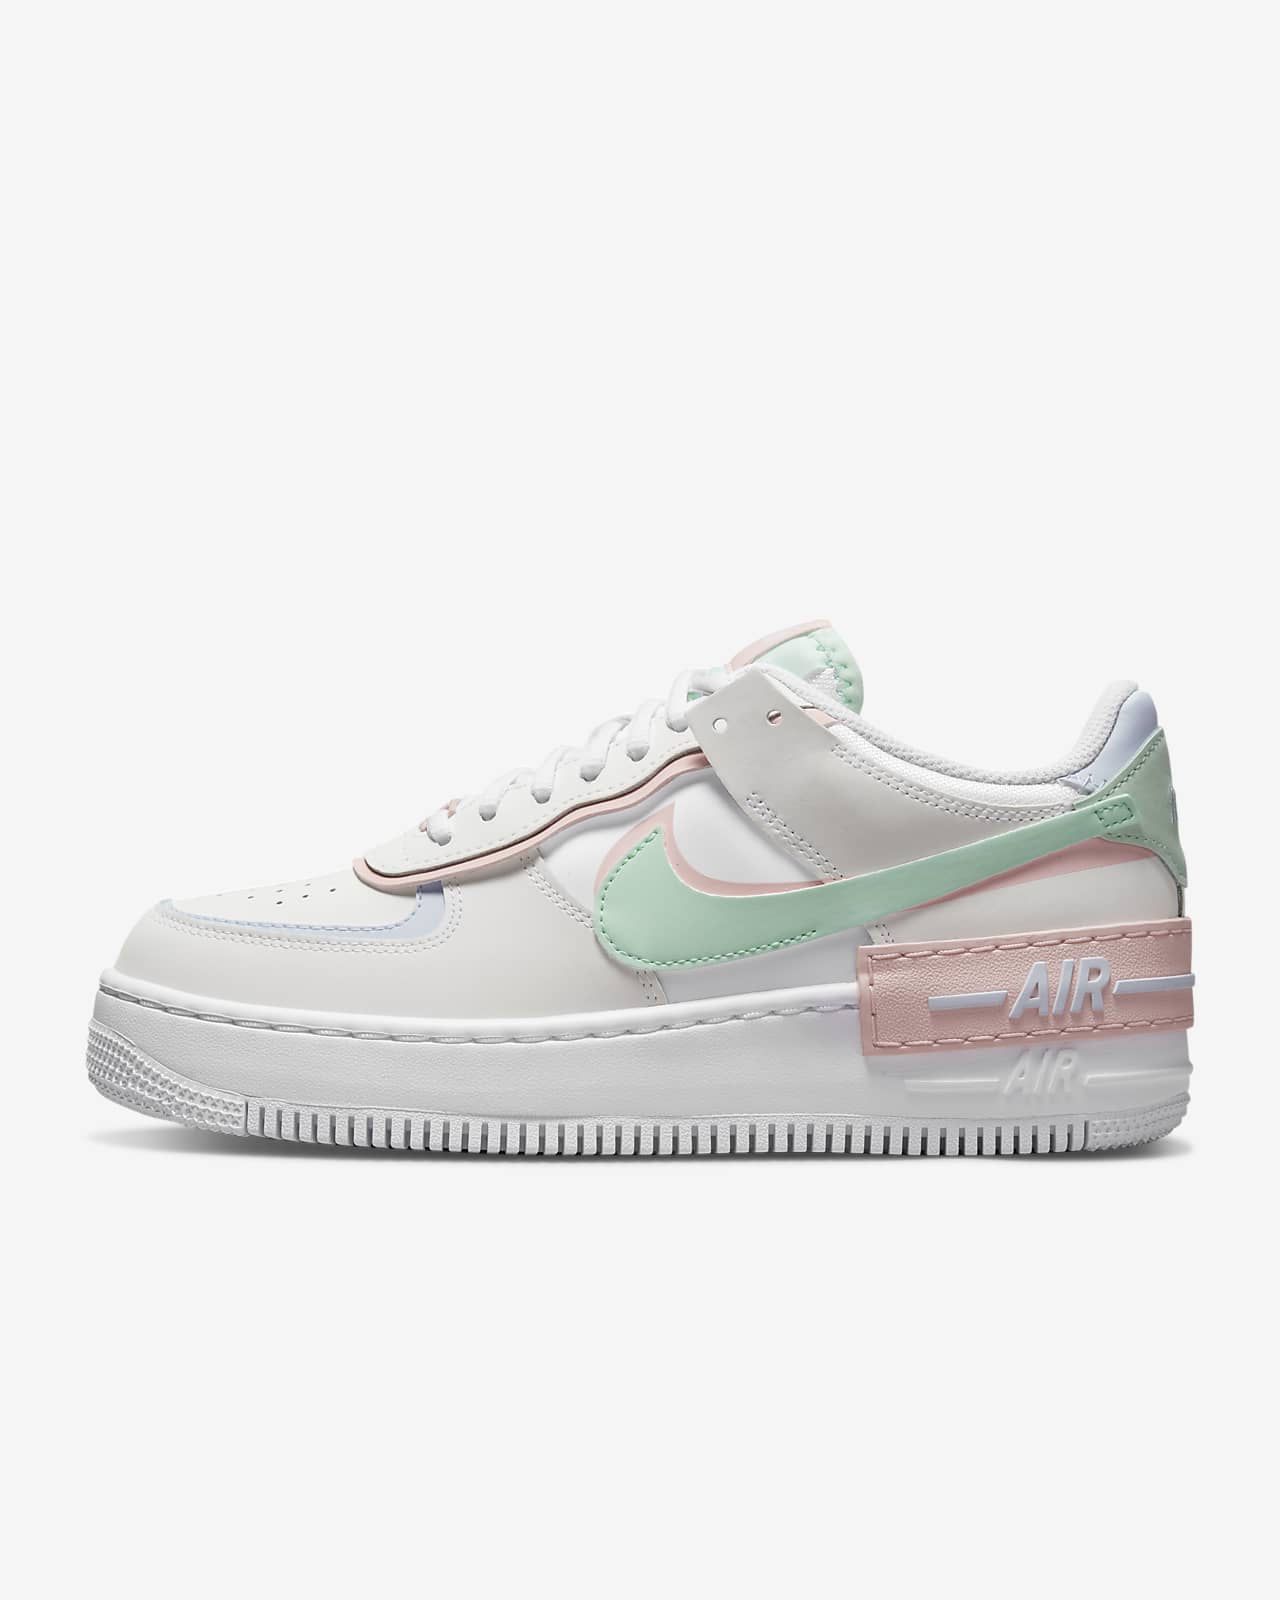 Air Force 1 Women's Shoes. Nike